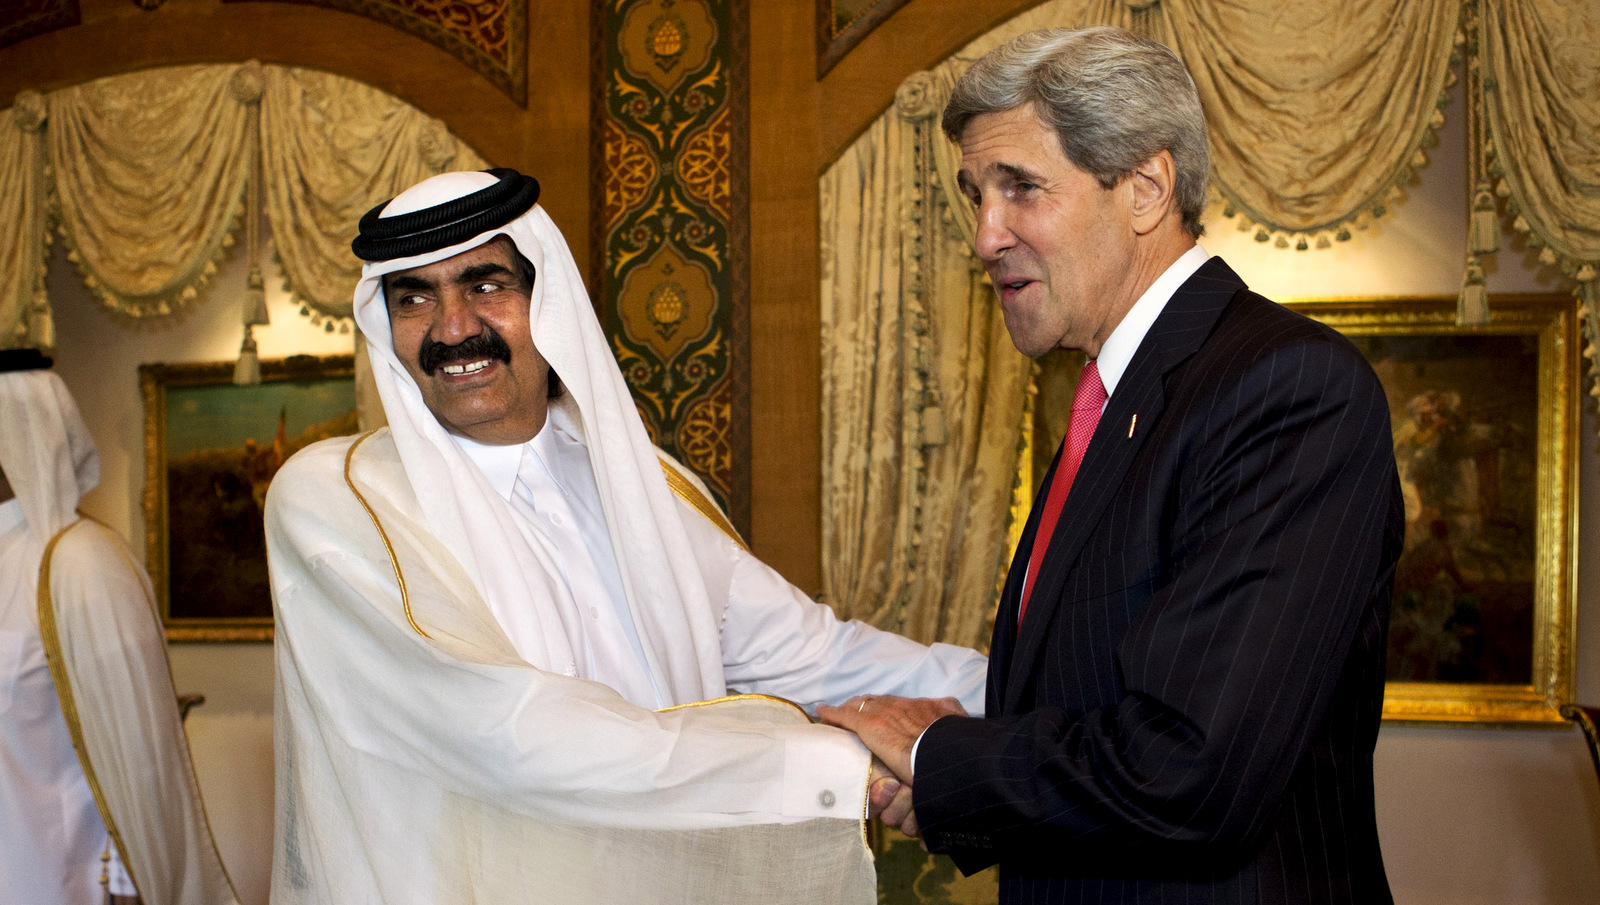 U.S. Secretary of State John Kerry, right, is greeted by Qatari Emir Hamad bin Khalifa Al Thani at Wajbah Palace in Doha, Qatar, on Sunday, June 23, 2013. In Qatar Kerry spent time discussing Syria and Afghanistan. (AP/Jacquelyn Martin)